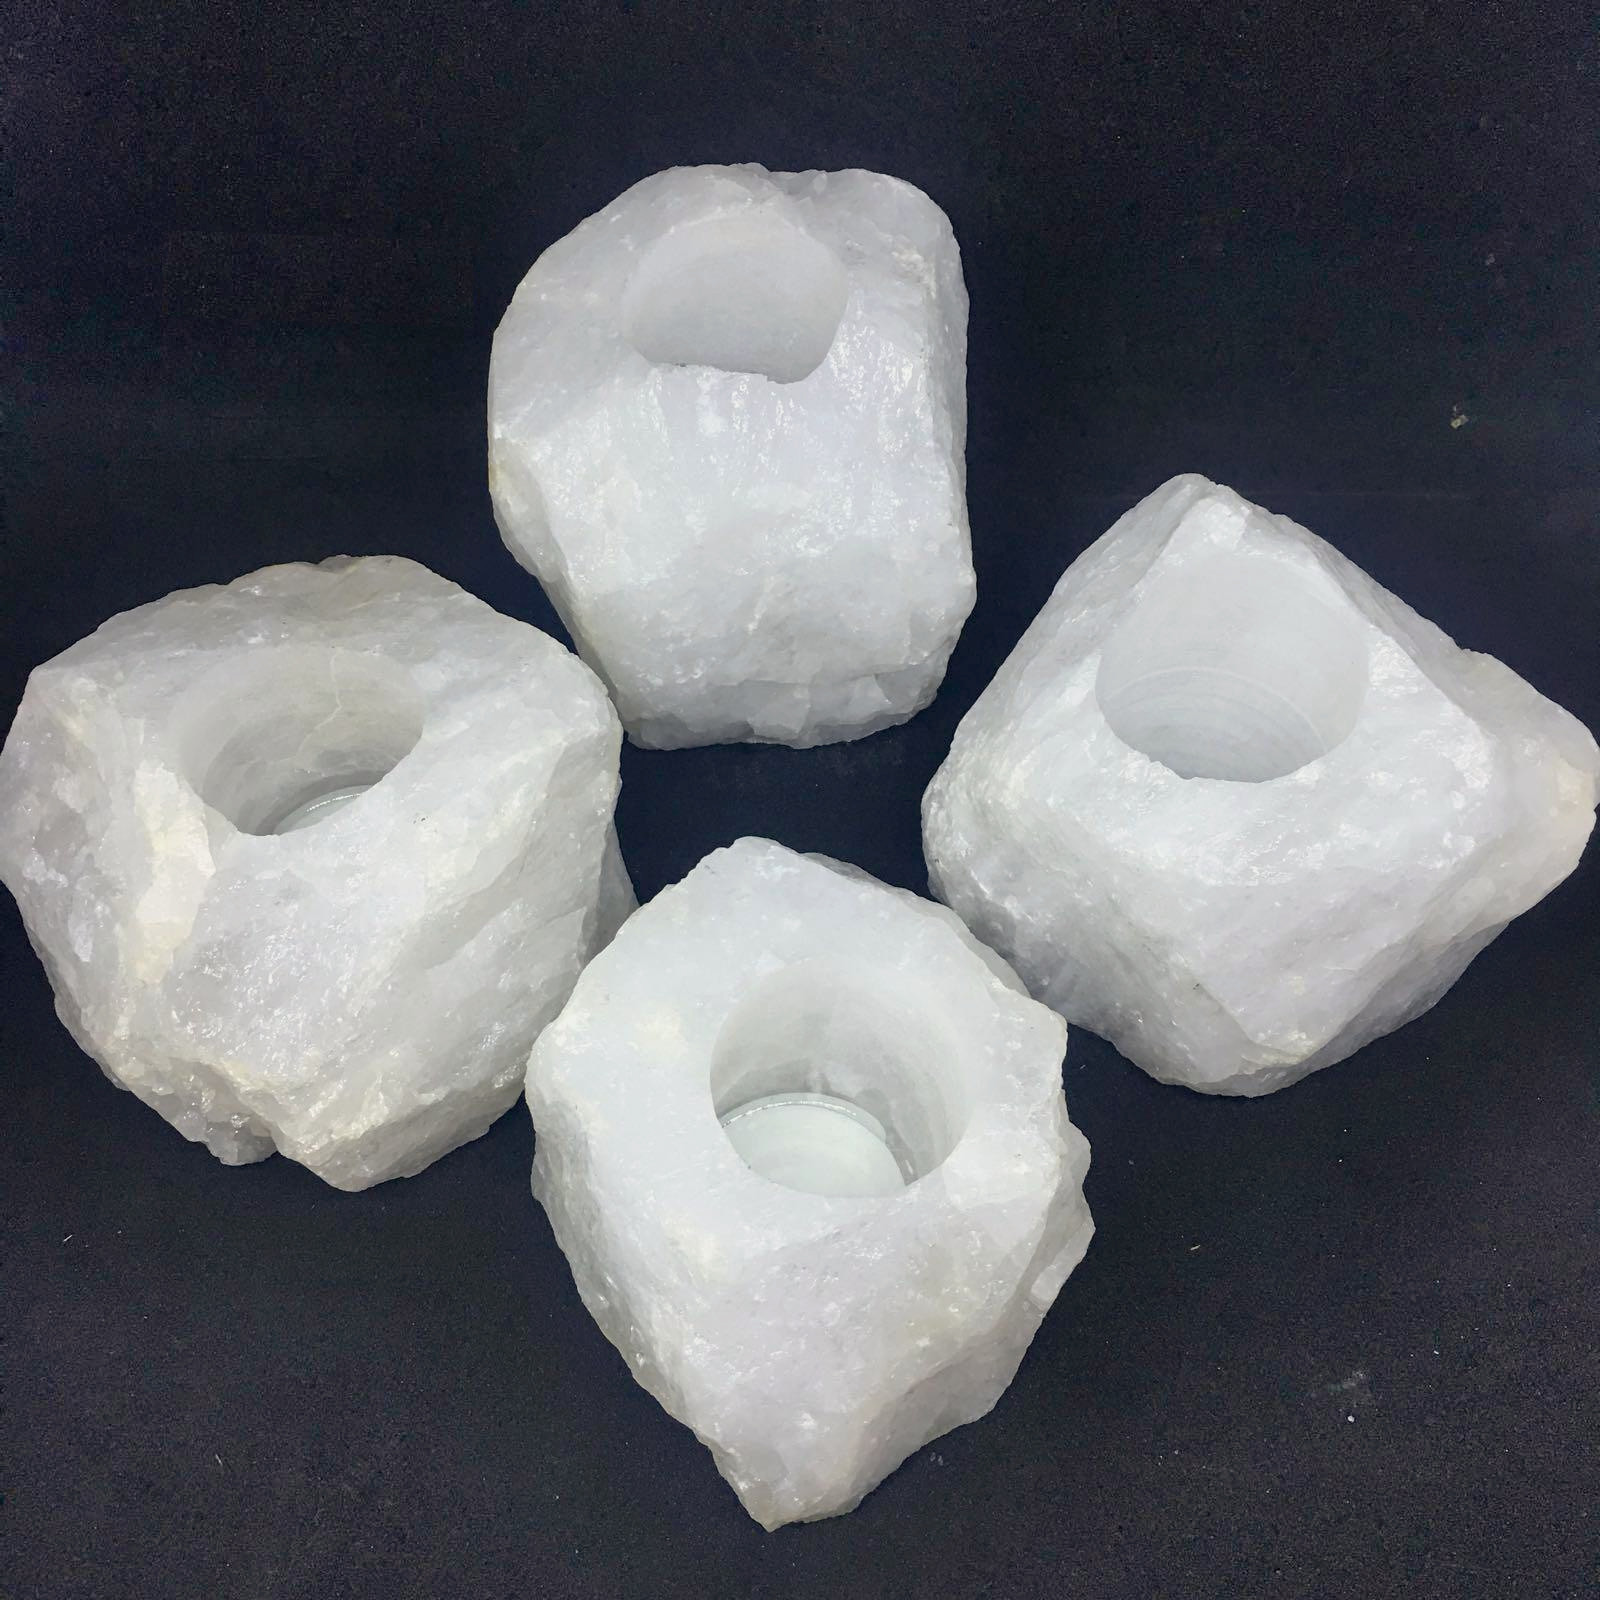 Crystal Quartz Rough Natural Tealight Candle Holder - 1pc - Click Image to Close